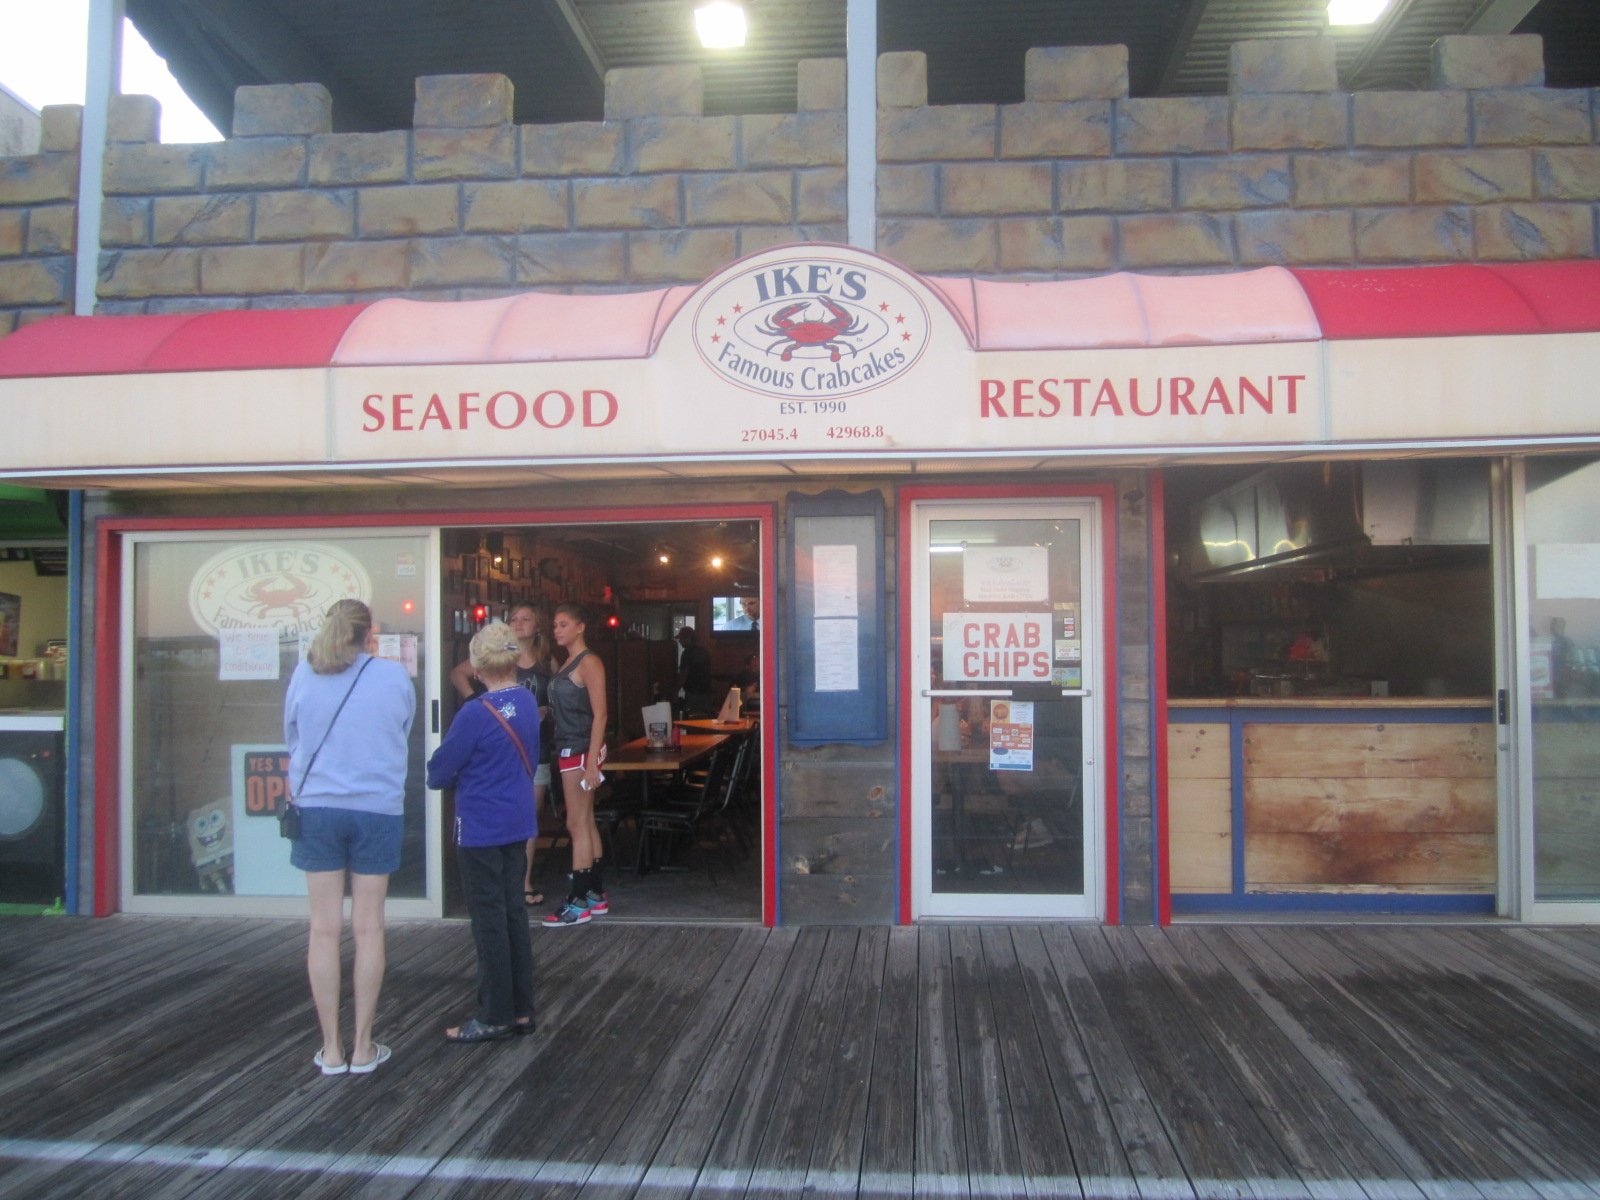 Ike's Famous Crabcakes - Established 1990 - Seafood Restaurant